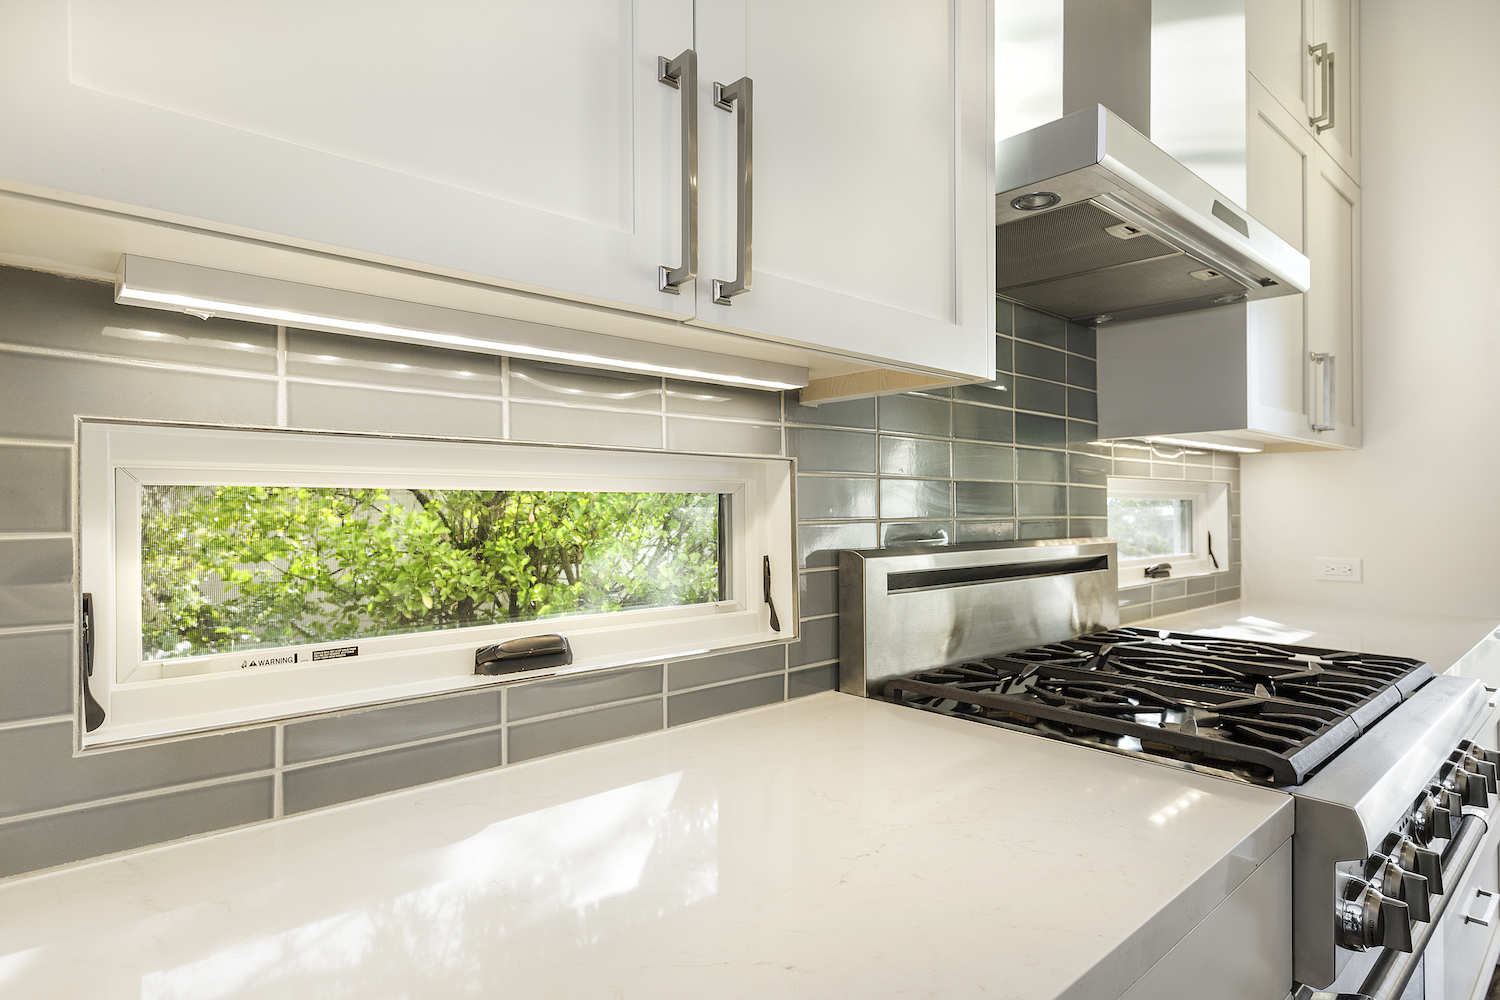 kitchen with white counters and accent windows in grey tile backslash.jpg